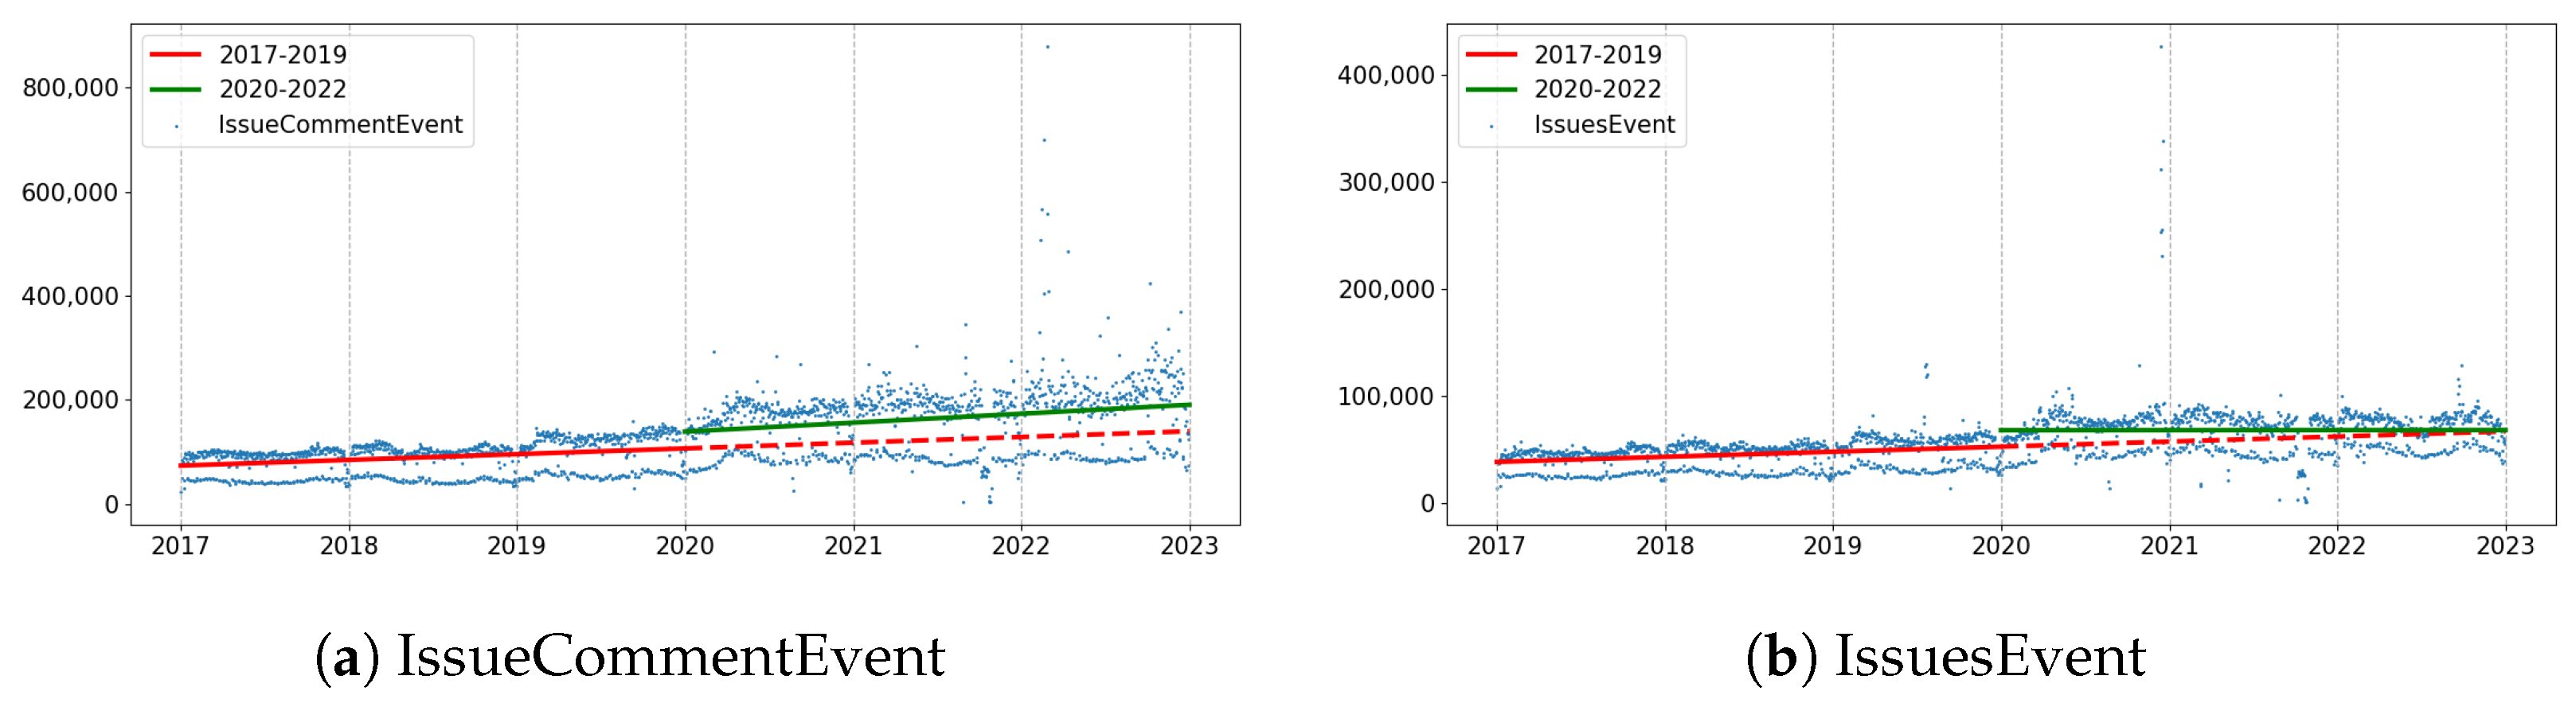 Octoverse 2022: 10 years of tracking open source - The GitHub Blog